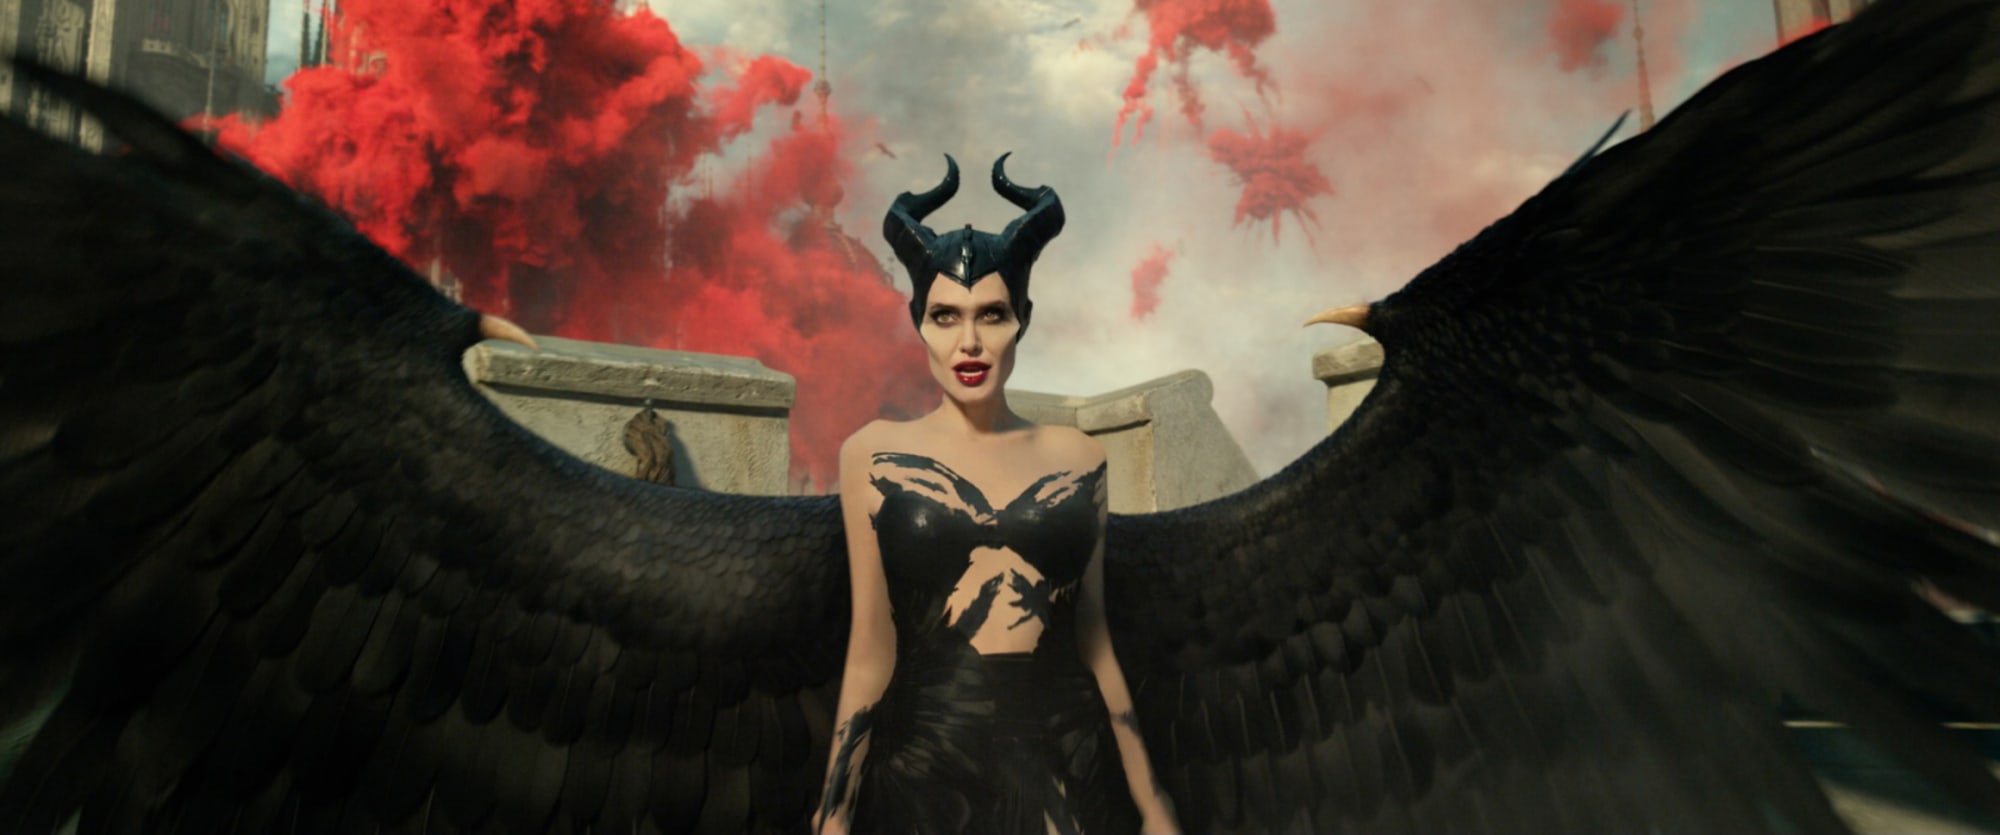 guide sej råb op When will Maleficent: Mistress of Evil come to DVD and Blu-ray?